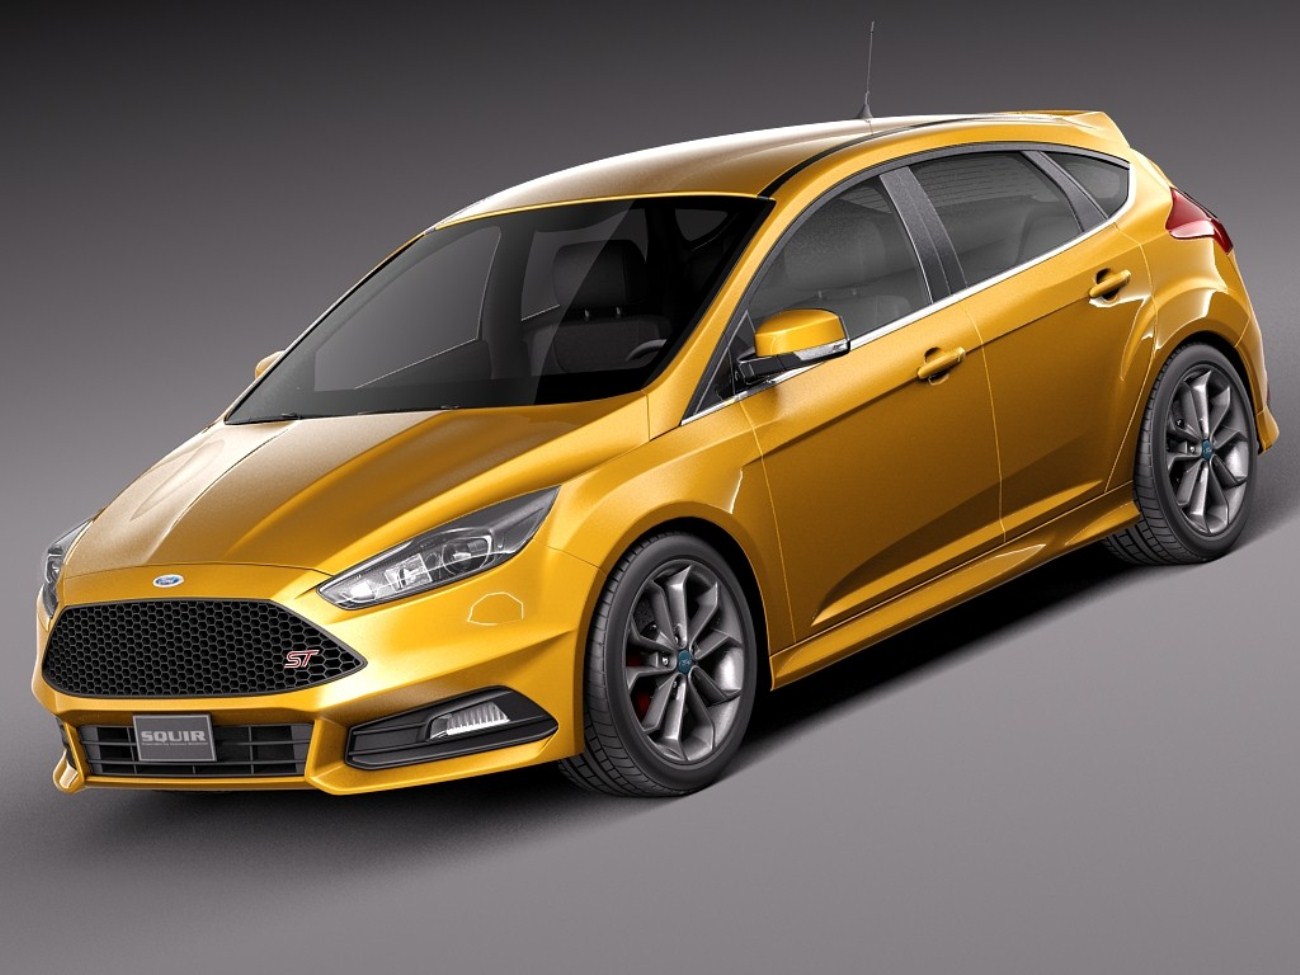 Wallpaper Focus St Car Photos Of For Your Lovely